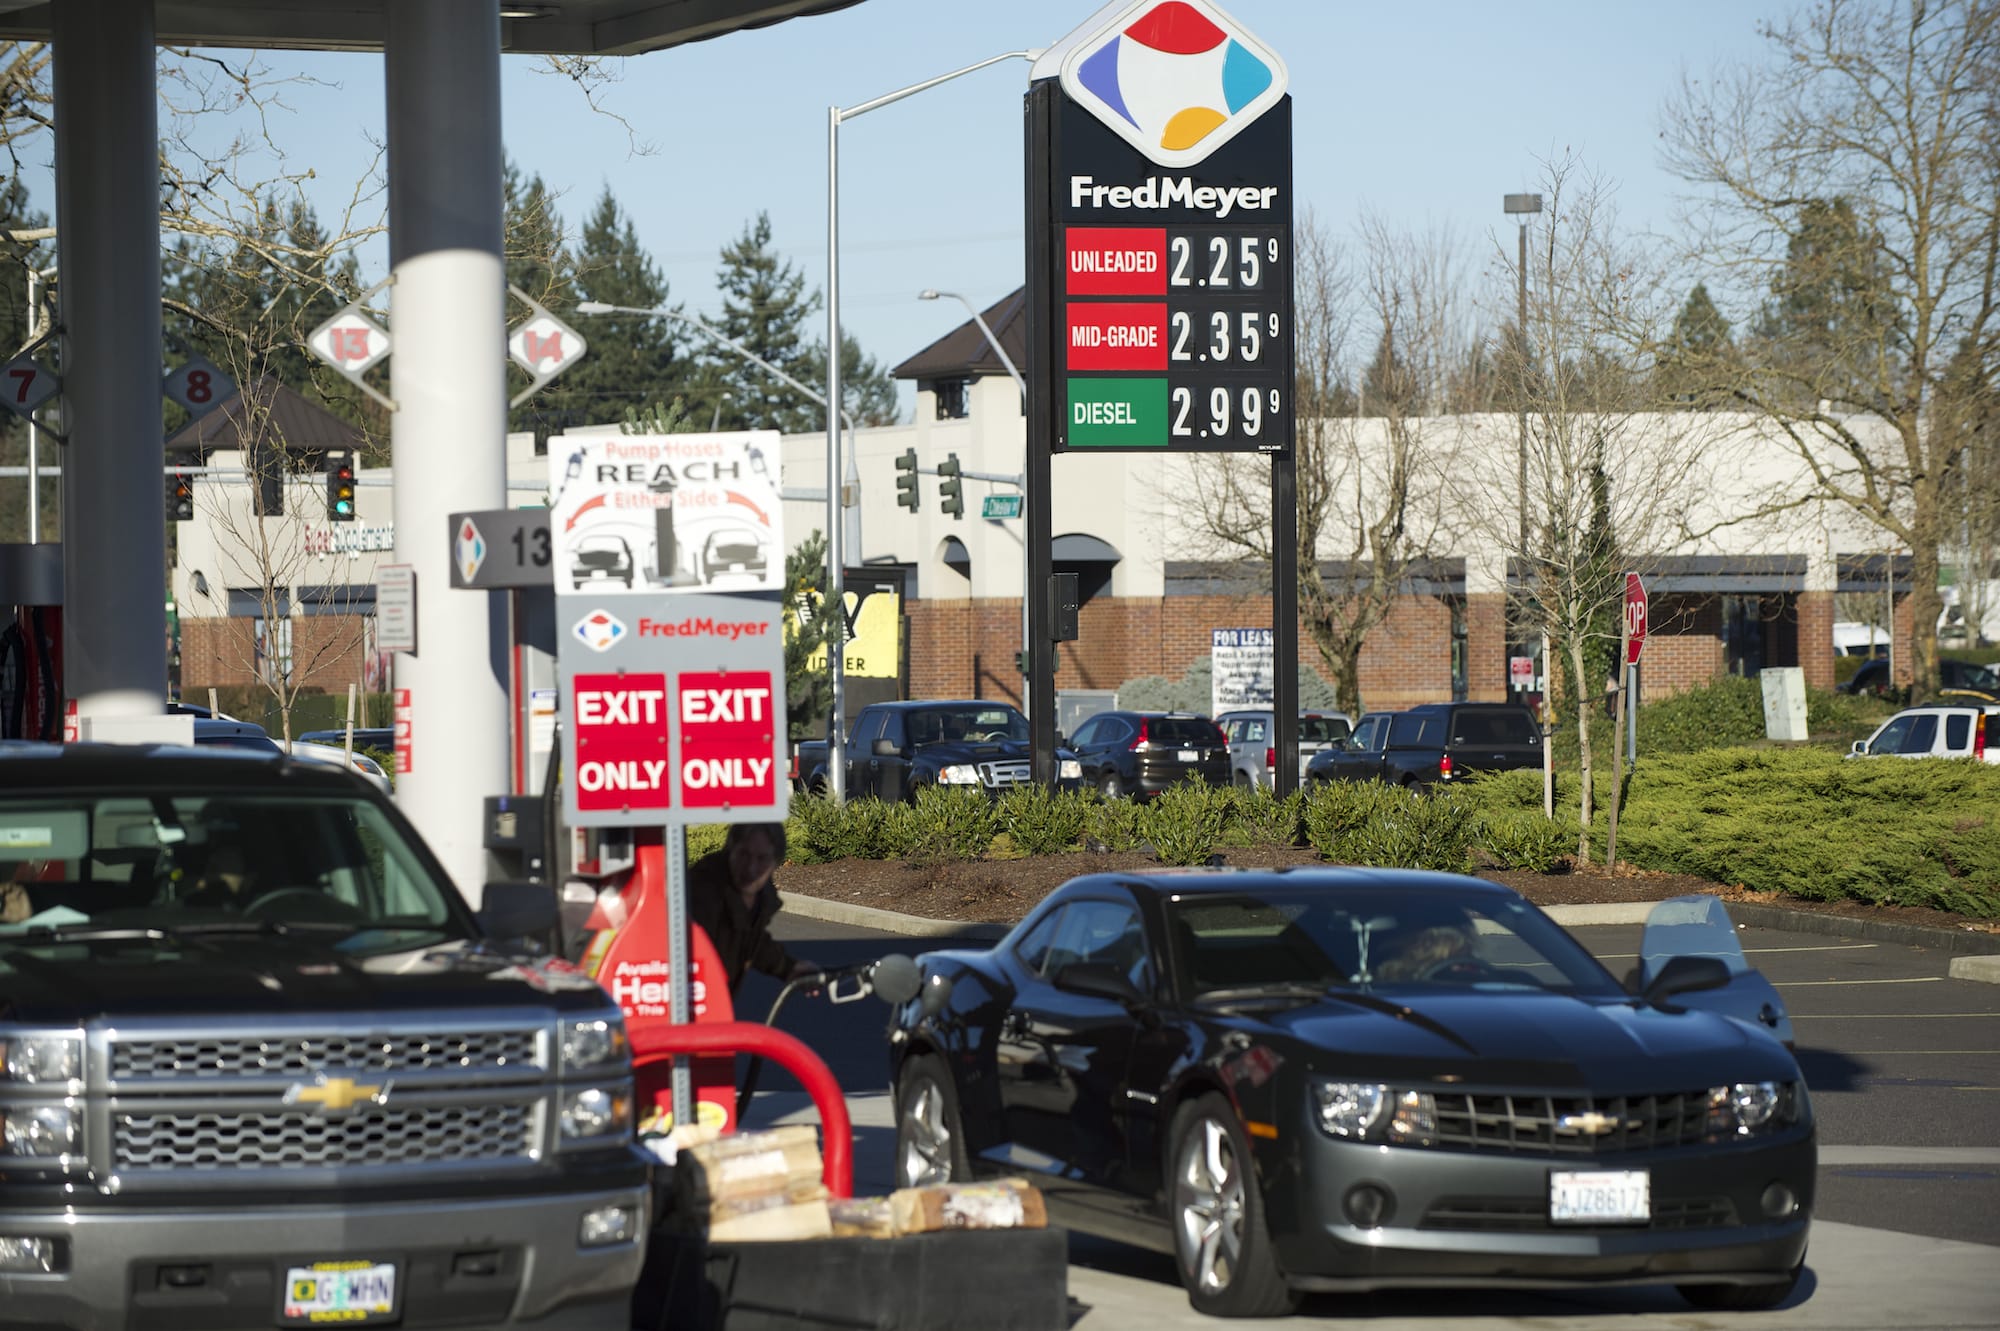 This week's AAA survey reported an average price of $2.56 per gallon for regular gasoline in Vancouver, but this Fred Meyer at  11325 S.E. Mill Plain Blvd., with a price of $2,25 per gallon, easily beat the average on Tuesday.